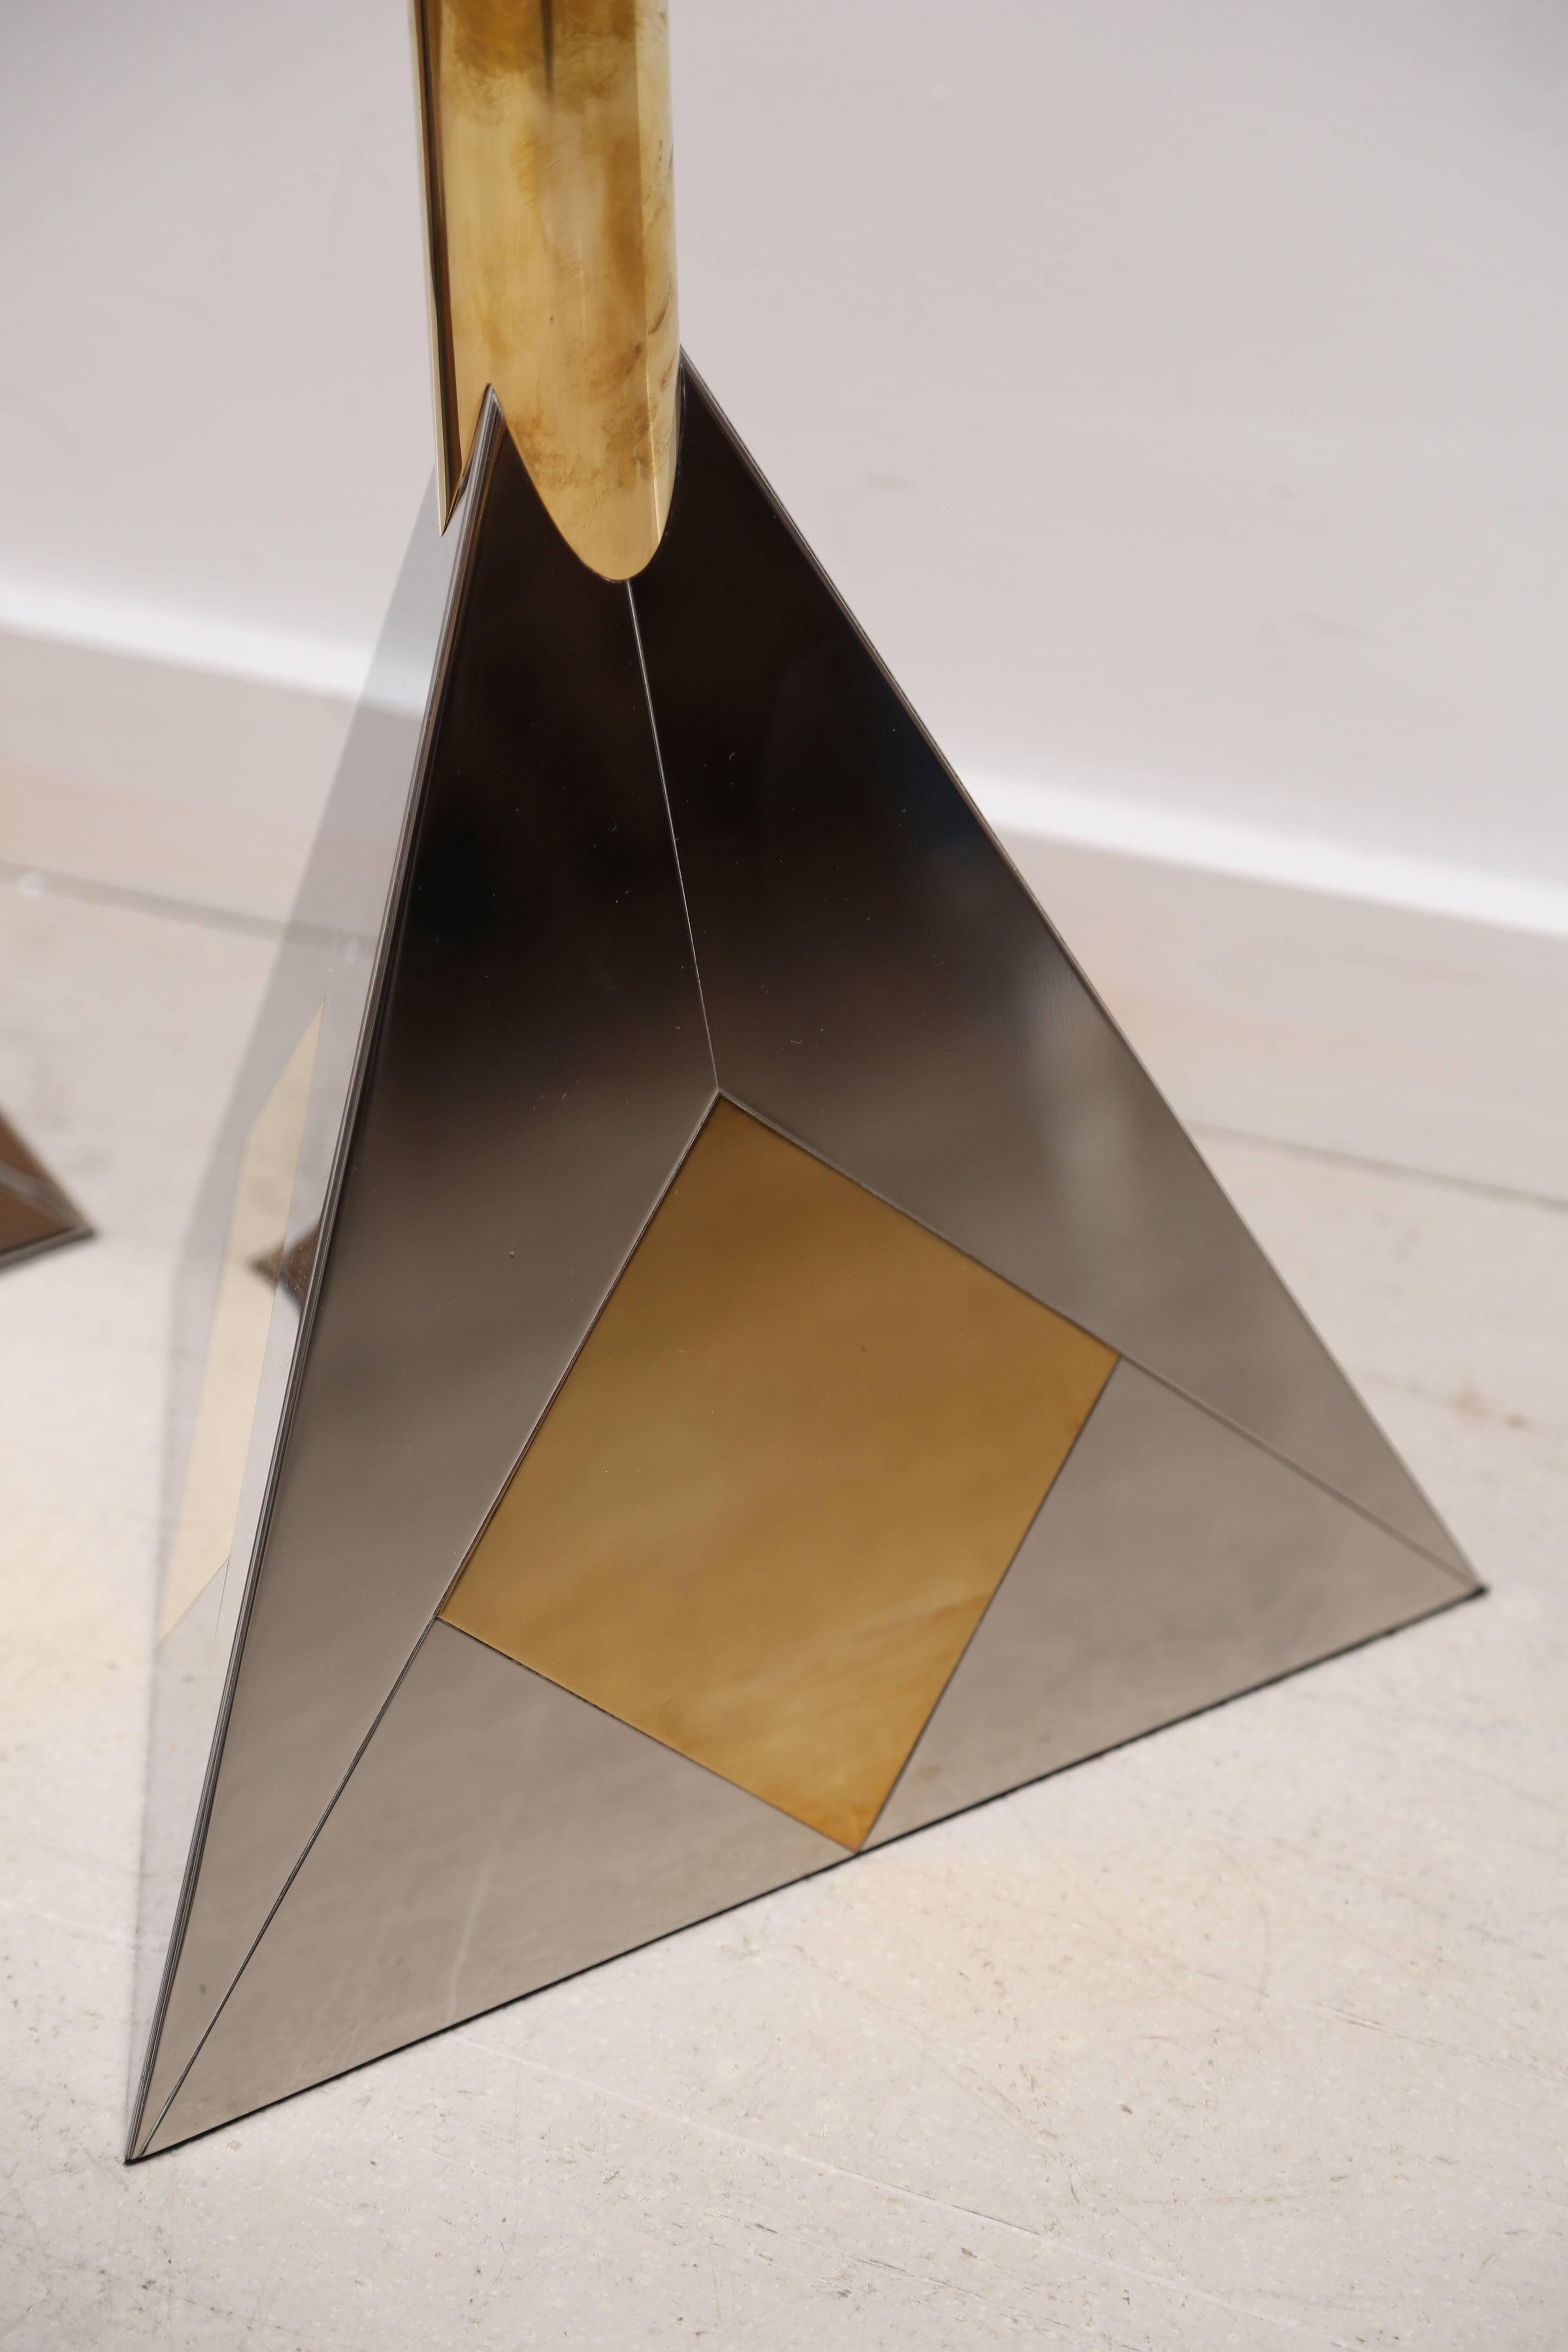 Pair of two-tone high polished Modernist triangular lamps, rewired for US standards.